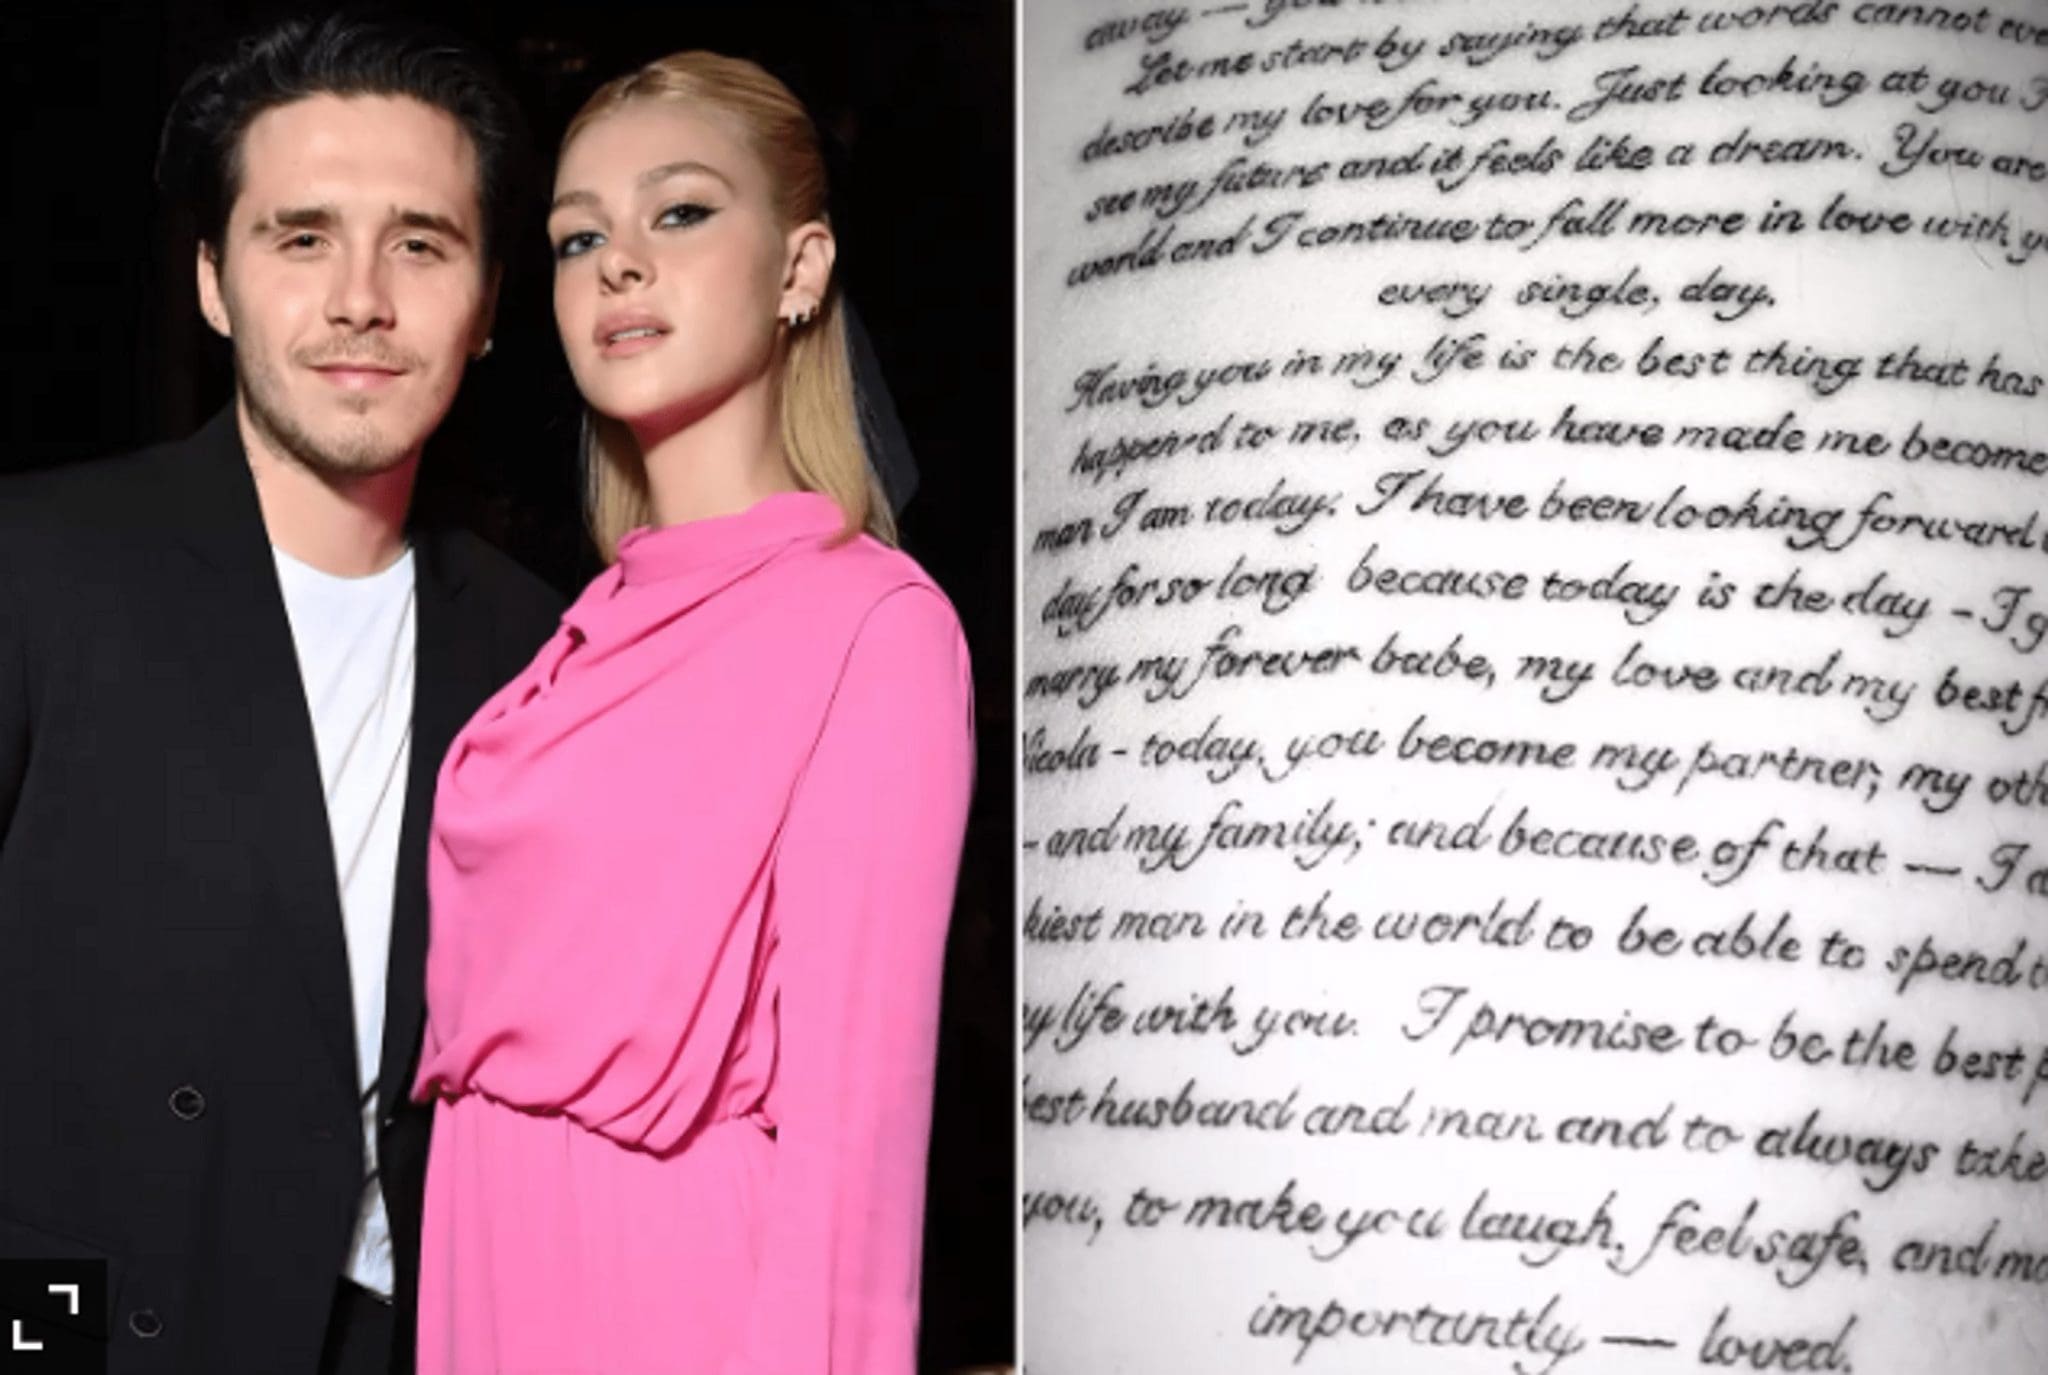 Brooklyn Beckham obtains a new tattoo of his wedding vows as a sign of love for Nicola Peltz